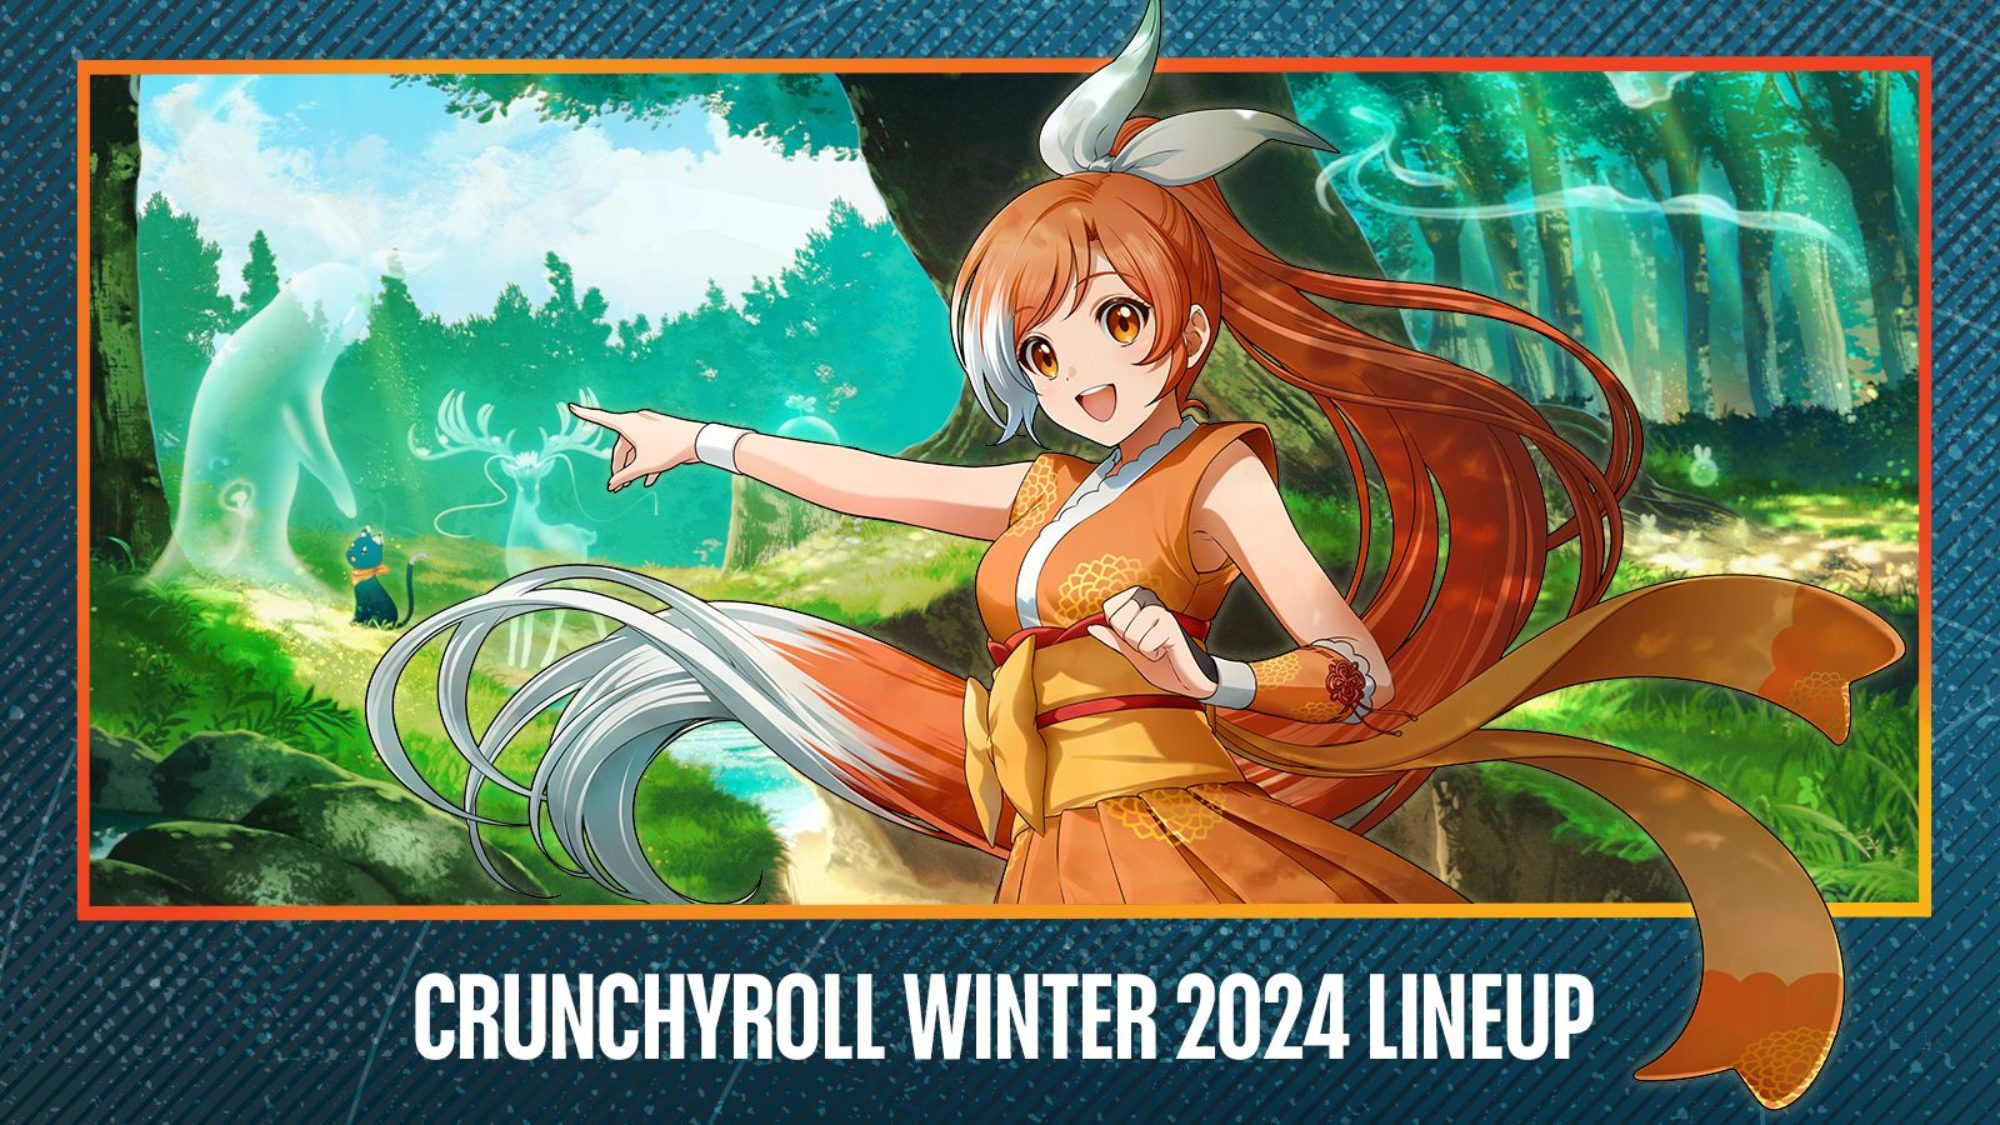 Crunchyroll is going to dub the anime into Telugu and Tamil along